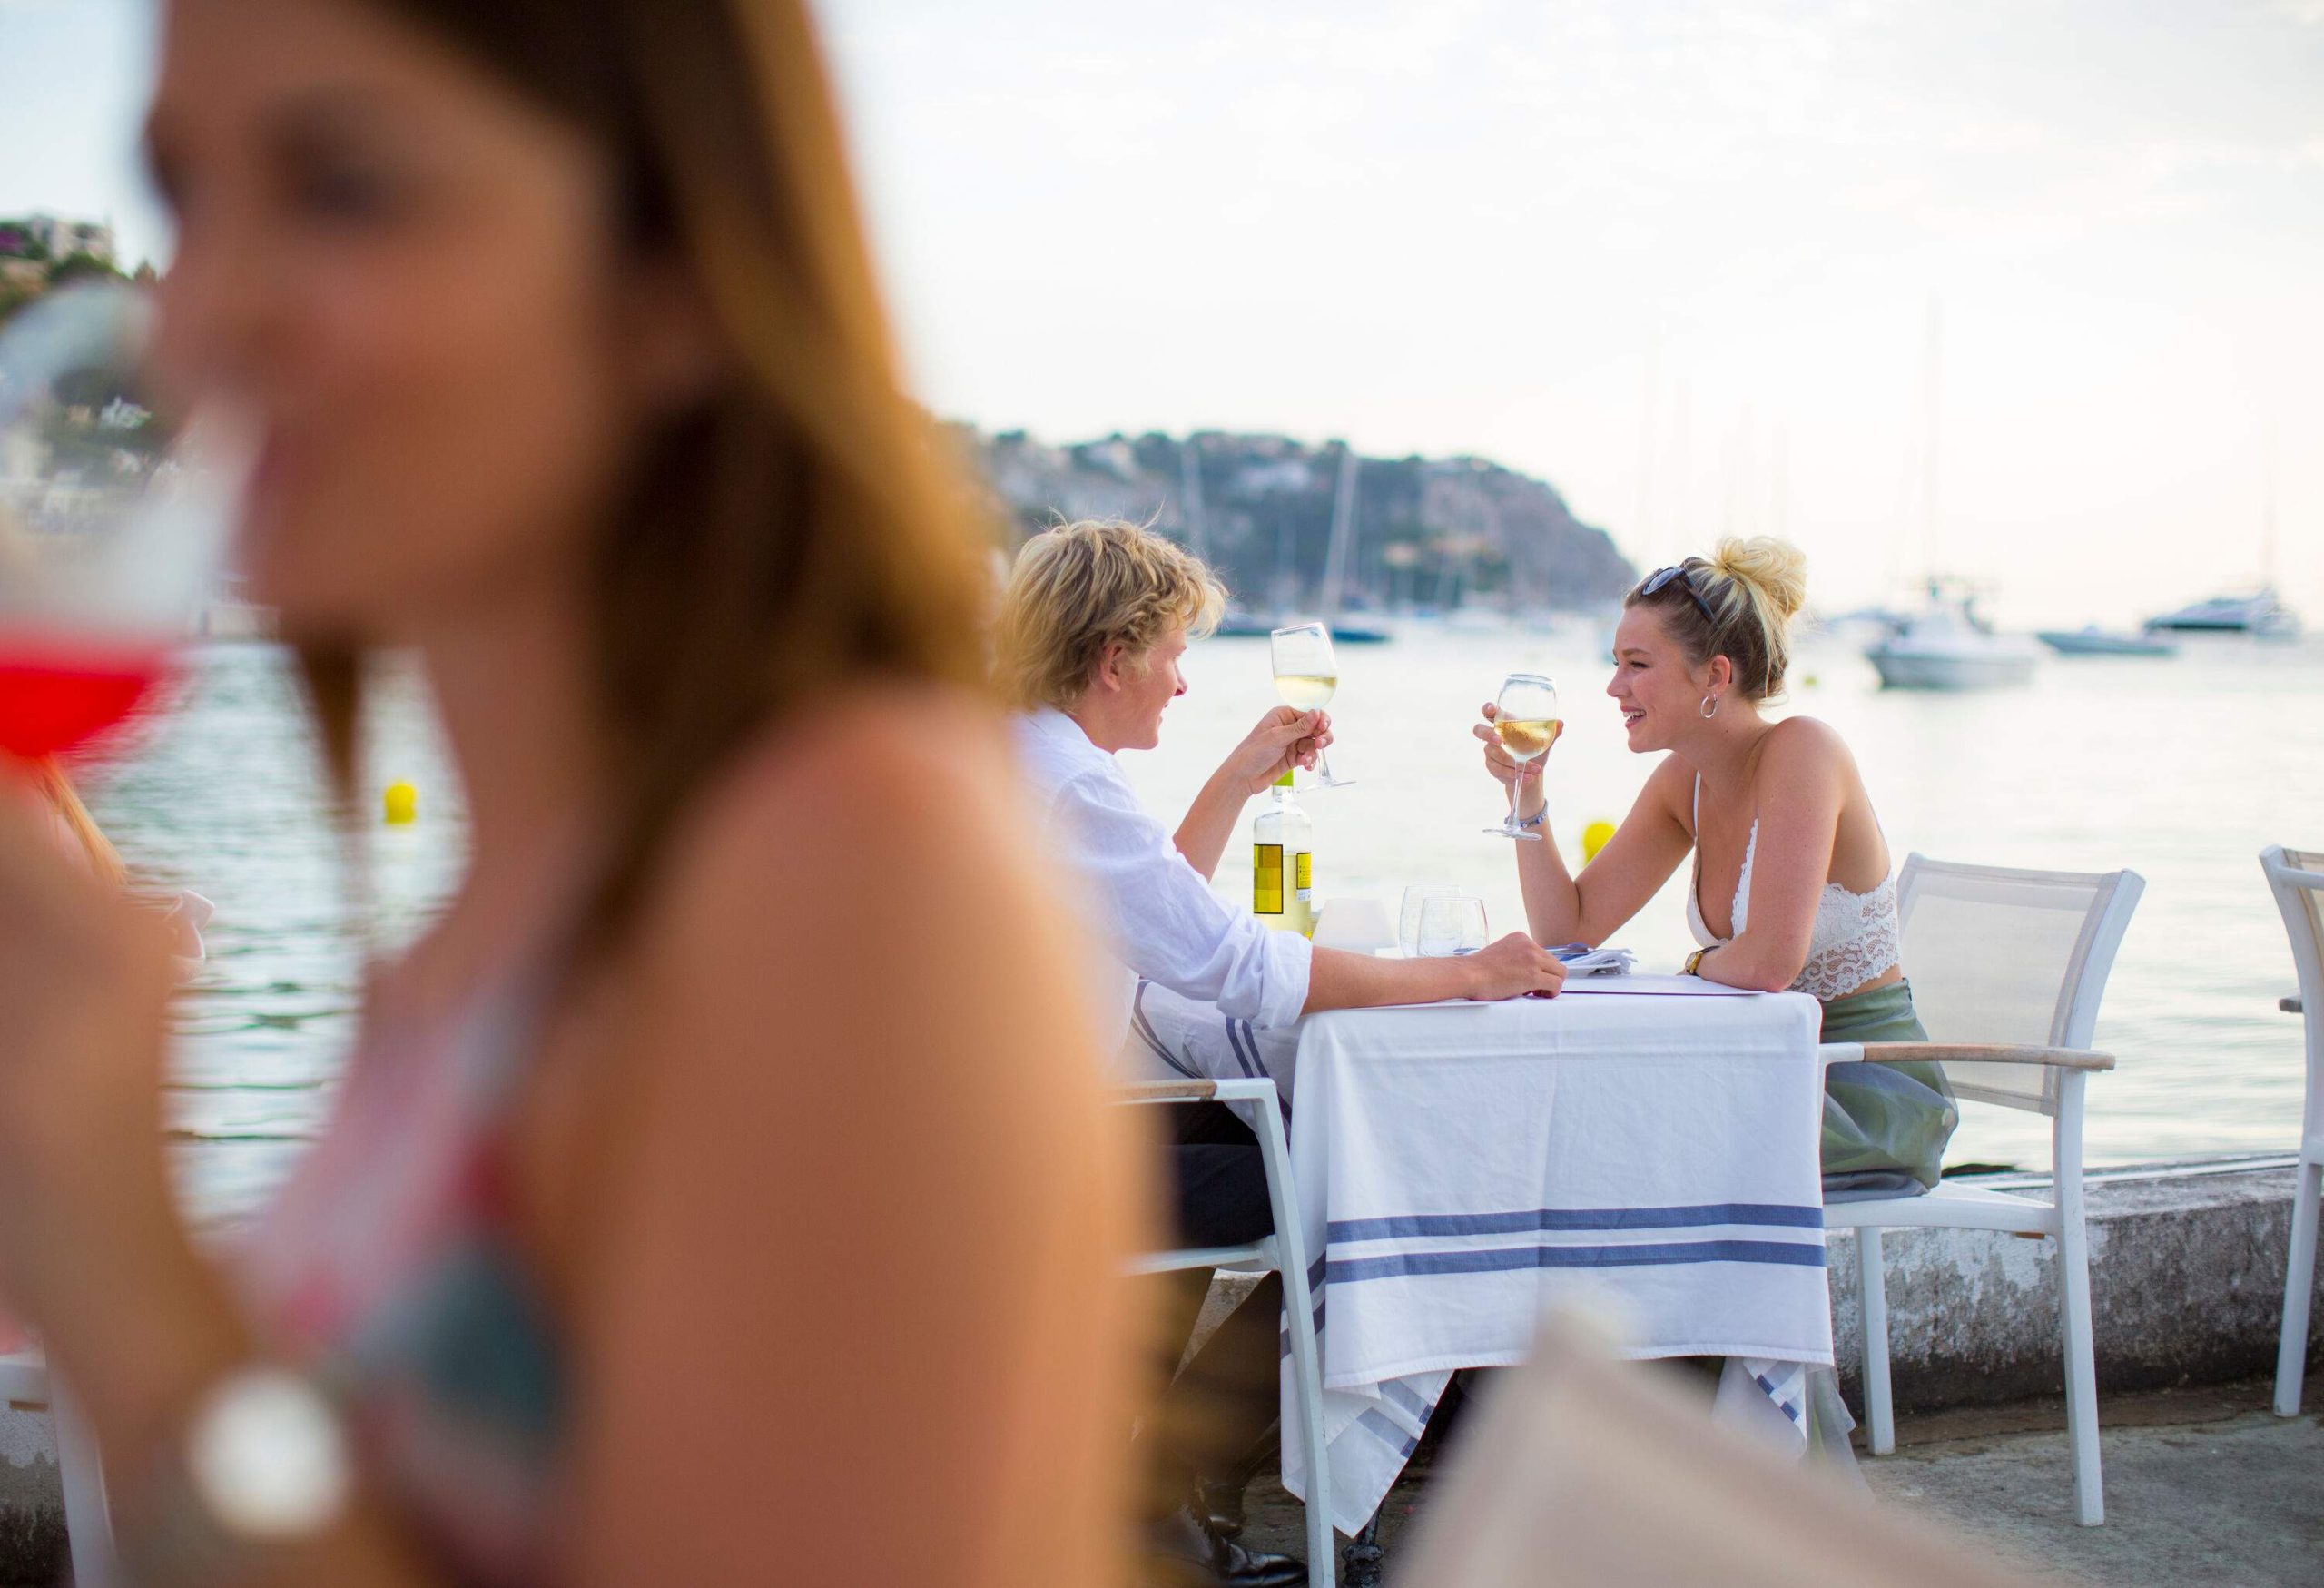 A blurred image of a woman with a background of a happy couple enjoying their drinks at a waterfront restaurant.